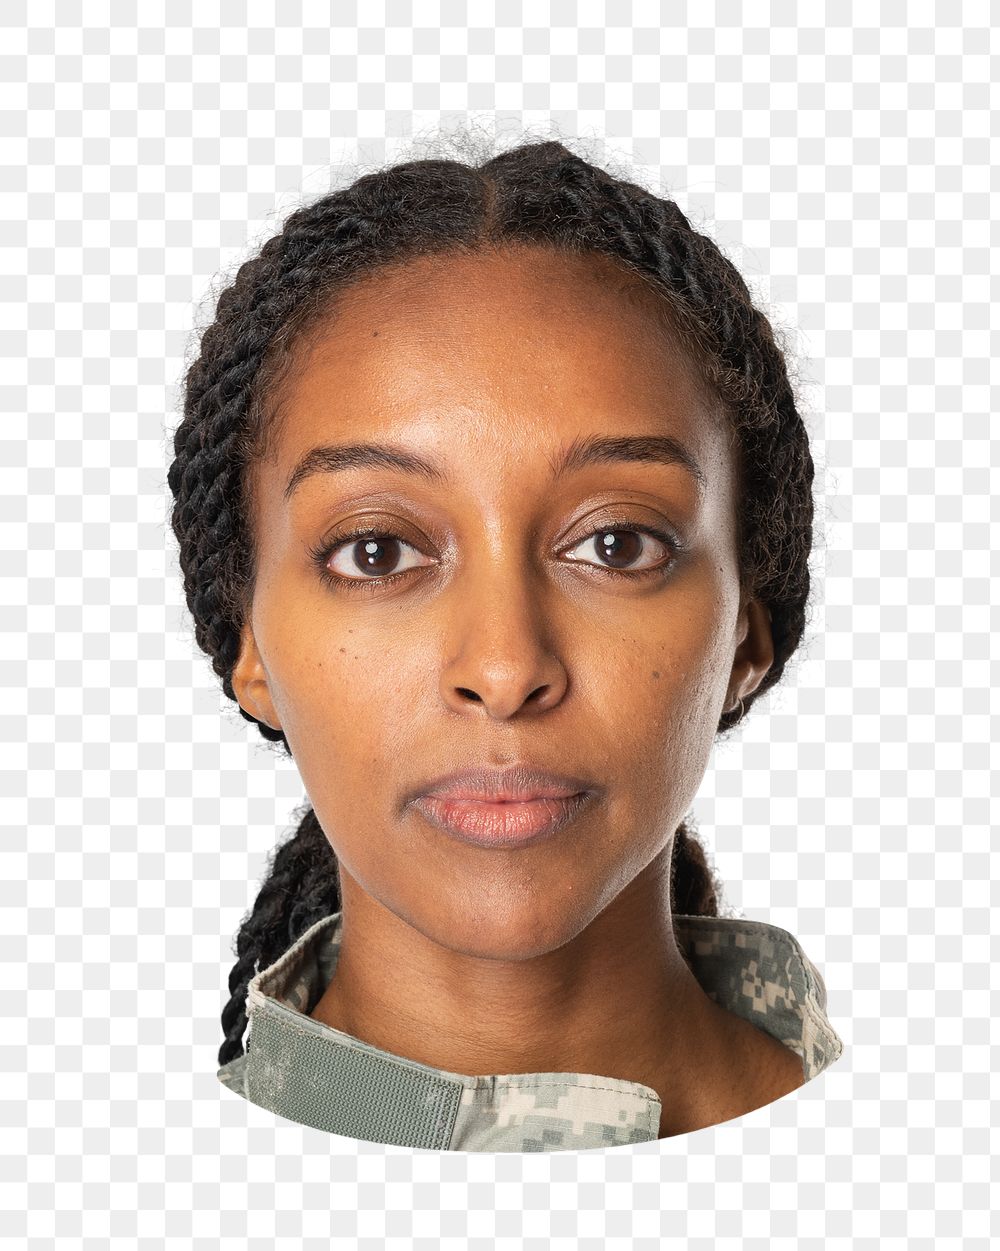 Female soldier close up png, transparent background